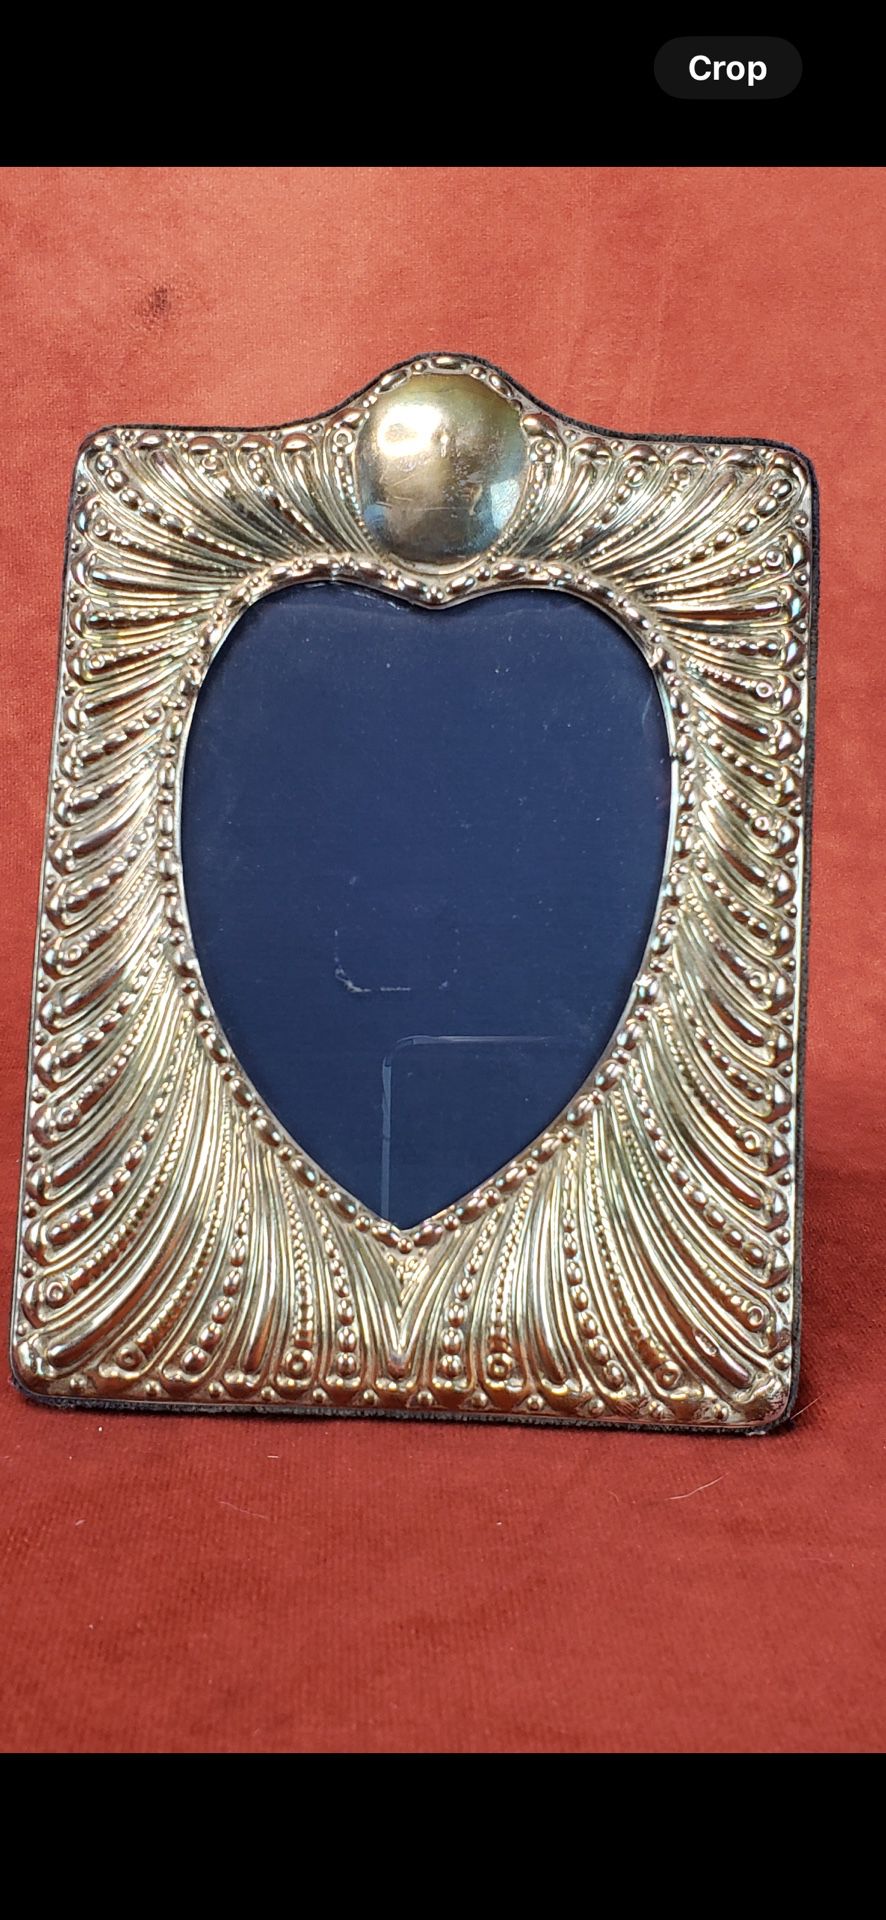 Vintage Silver Plated Frame with Heart Shape Inset